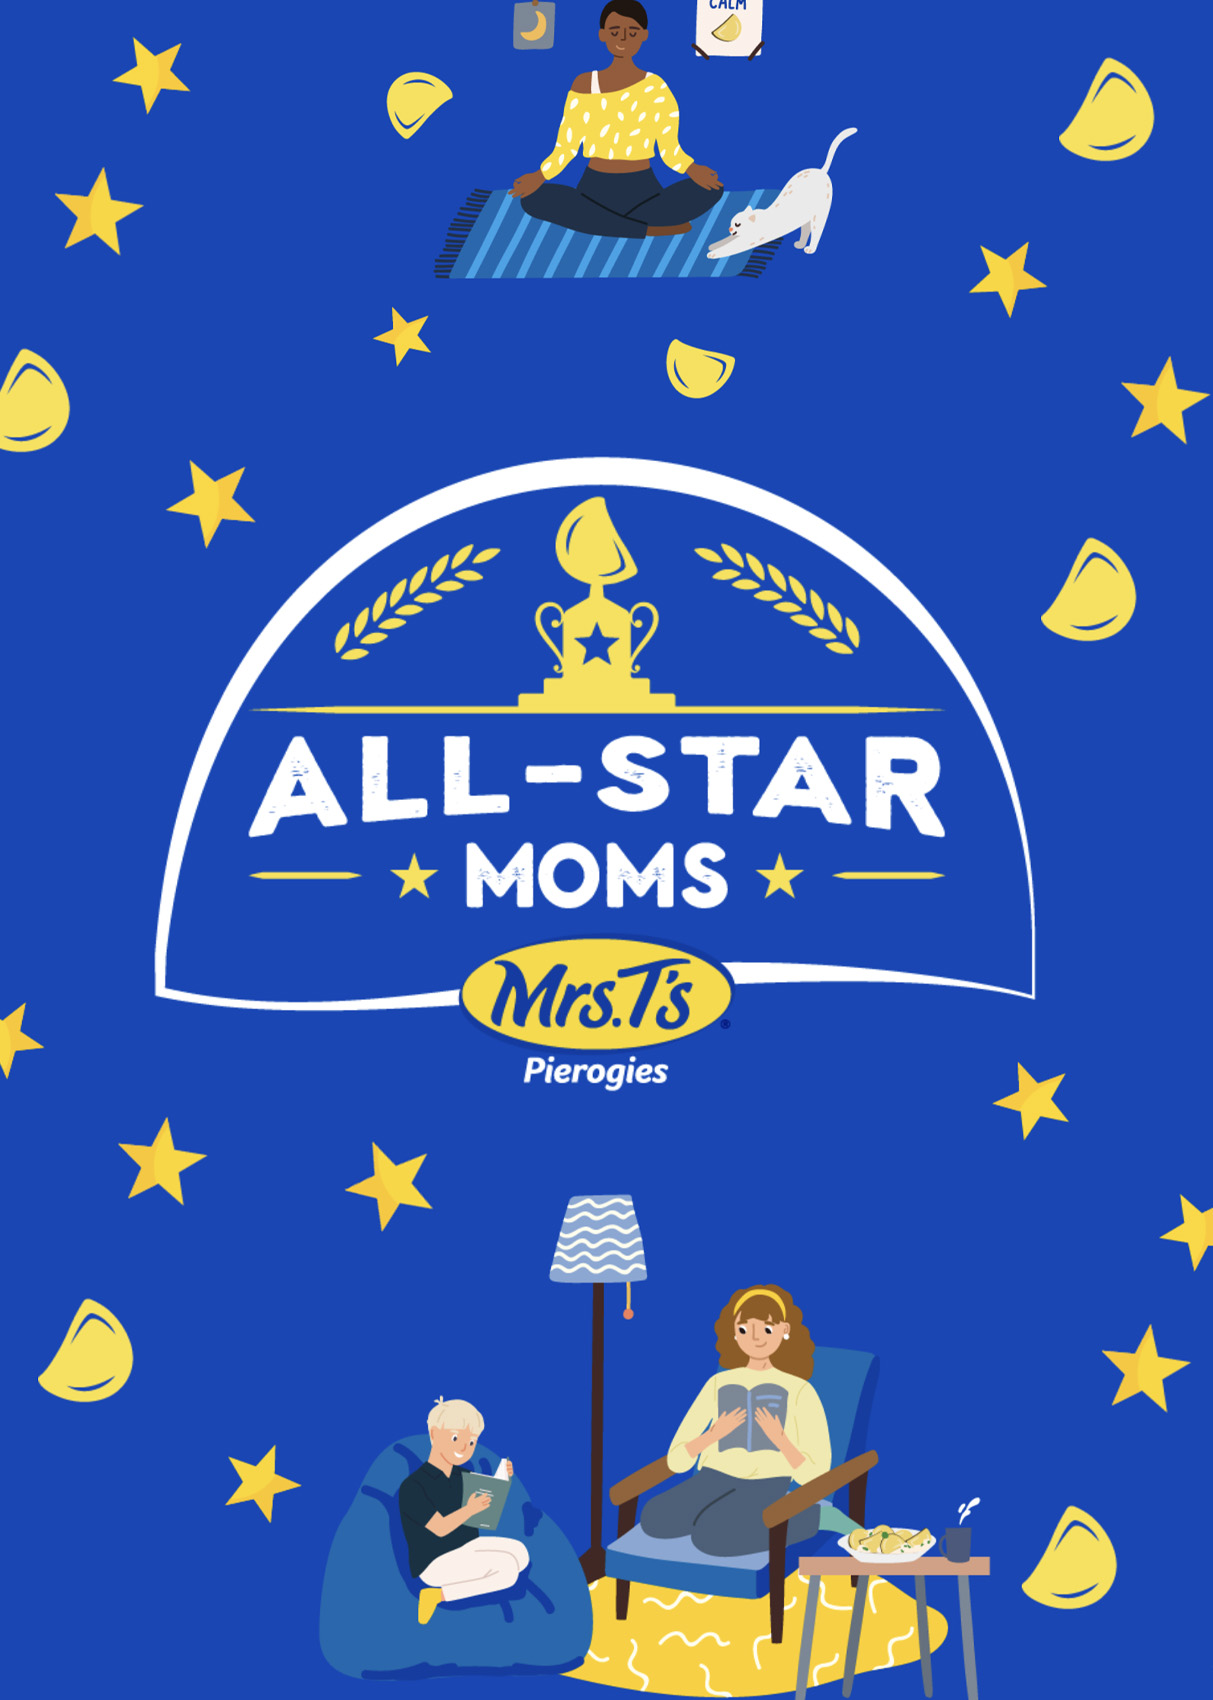 All Star Moms Program is Now Live! Enter today.